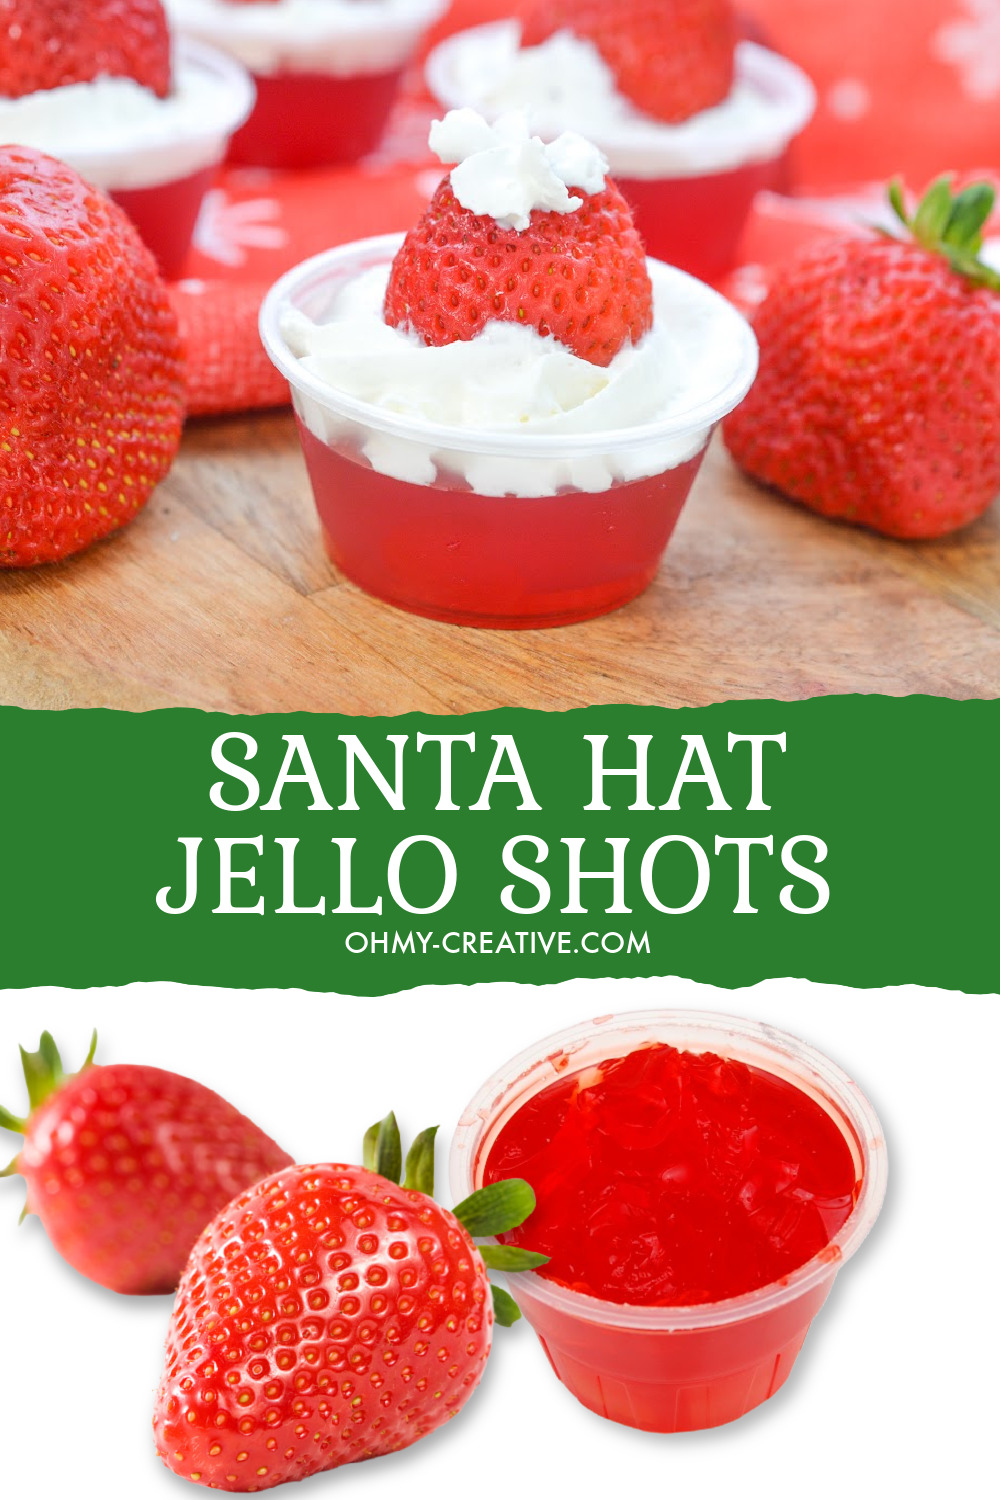 Whip up these Santa Hat Jello Shots using strawberry Jell-O, strawberries and whipped cream - a tasty strawberry jello shot recipe. Also showing a couple of whole strawberries and a cup of strawberry jello before decorated.